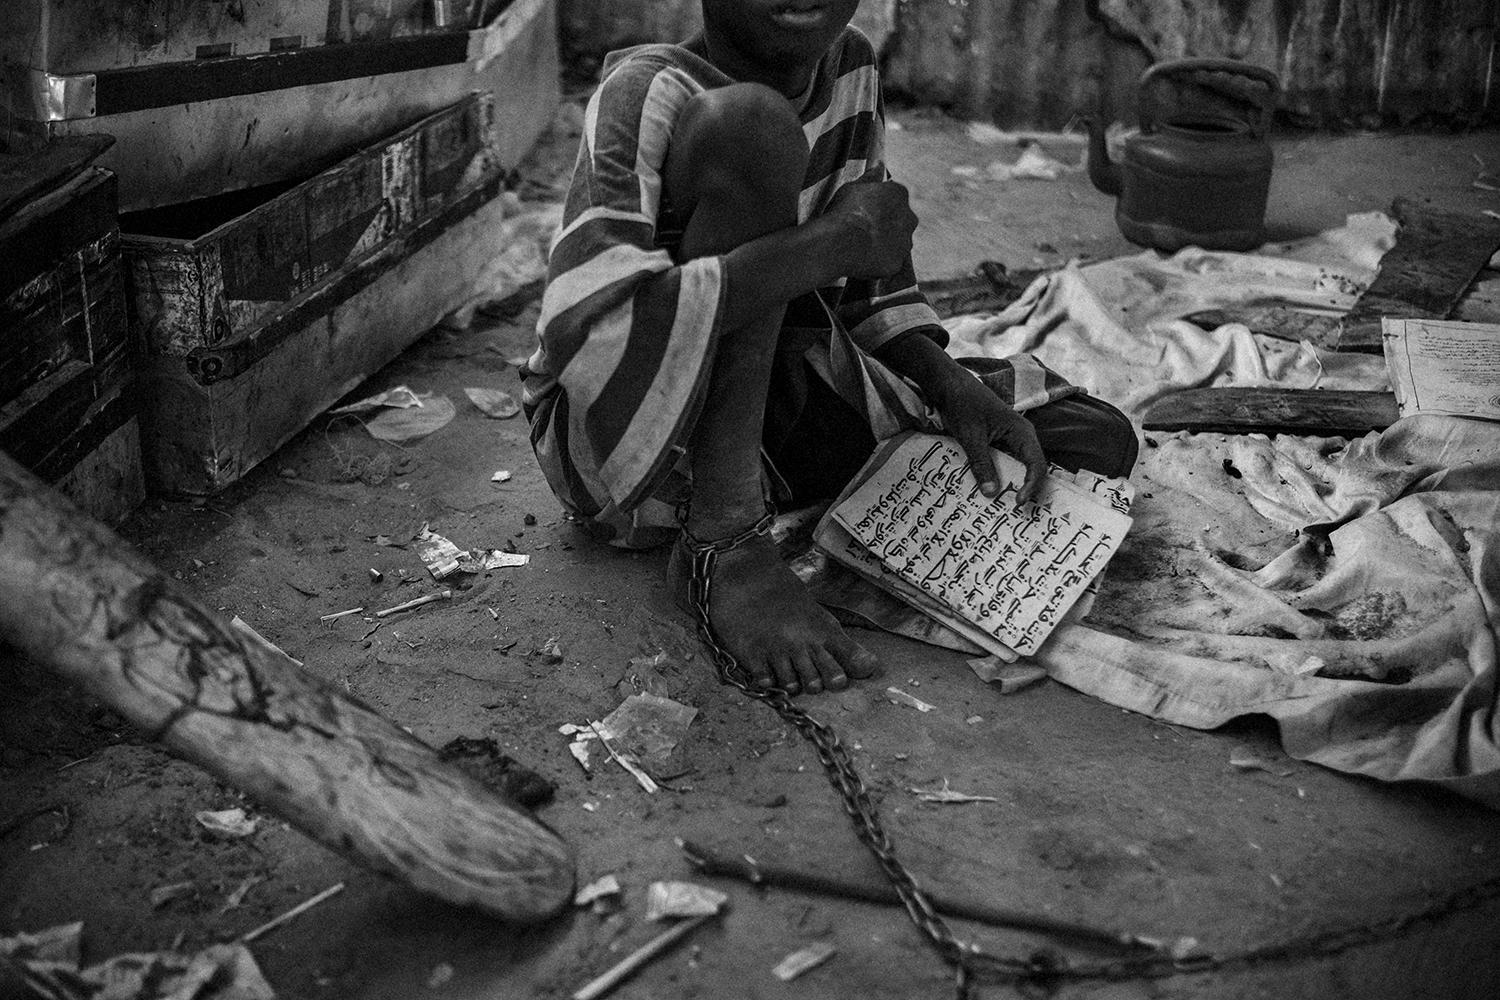 A young talibé boy studies the Quran, bound by chains in a Quranic school in the city of Touba, Senegal, in May 2015. 